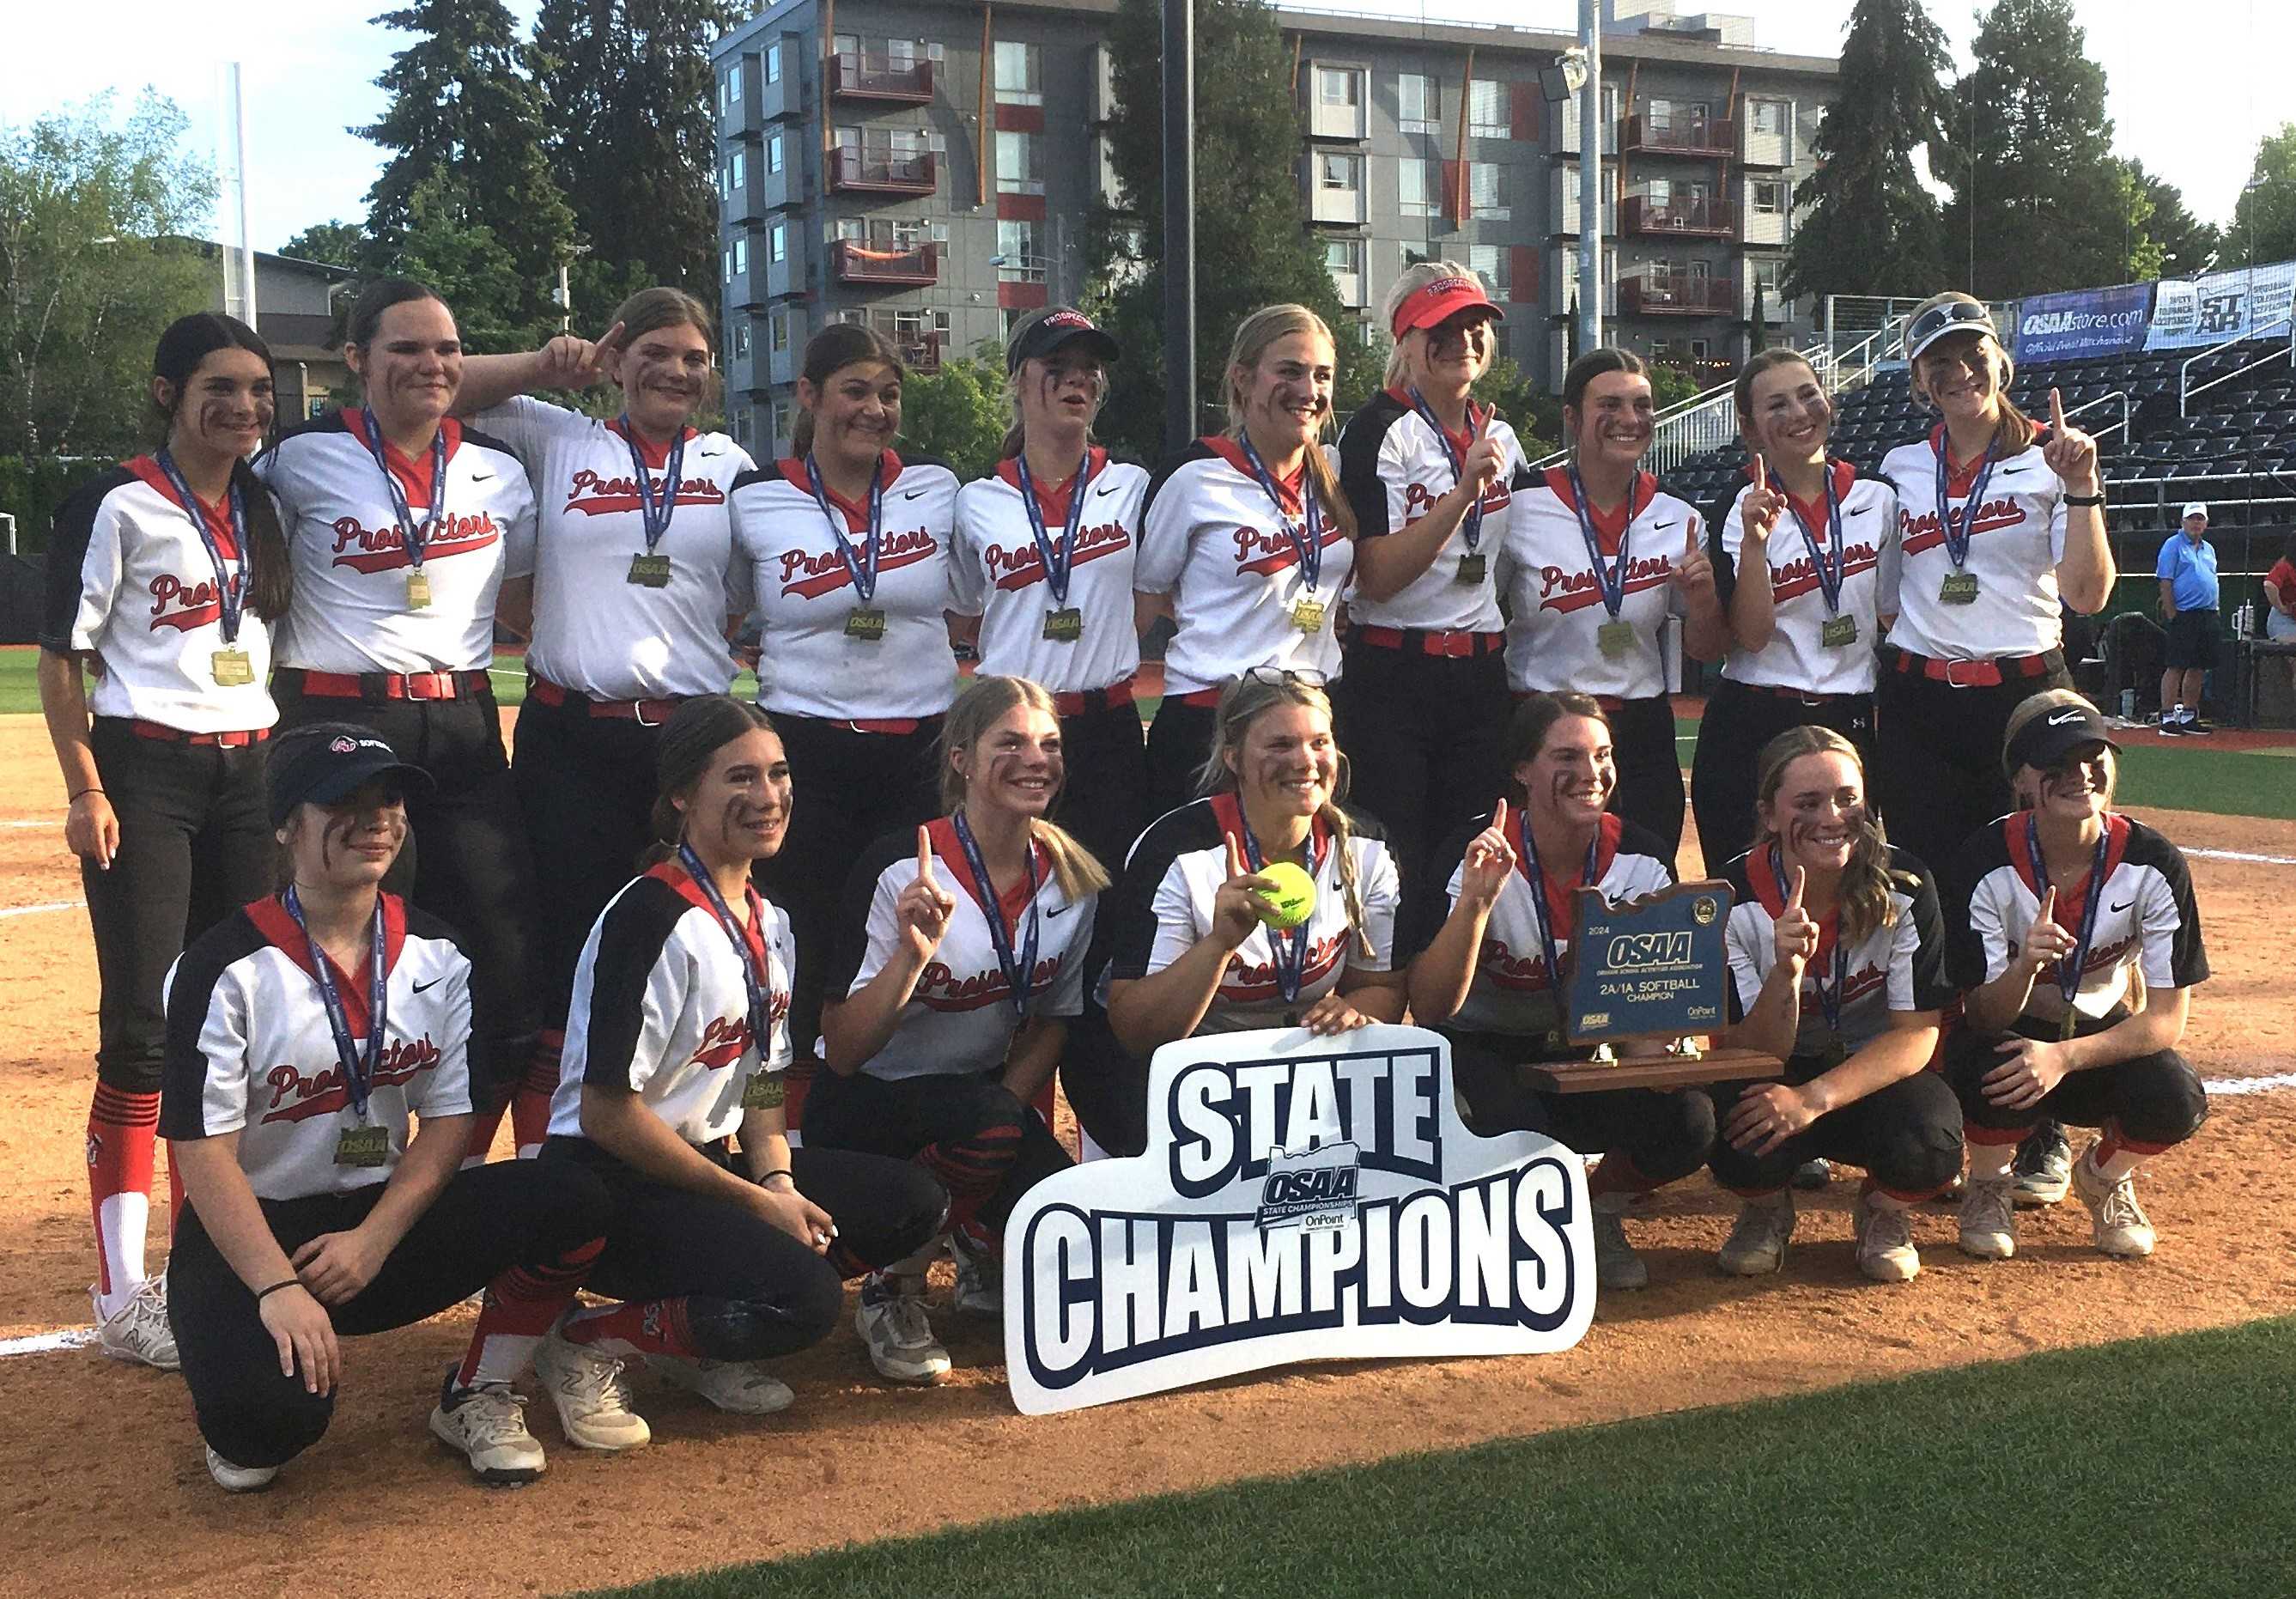 Grant Union won its second consecutive 2A/1A softball championship Friday by beating Weston-McEwen at the University of Oregon.